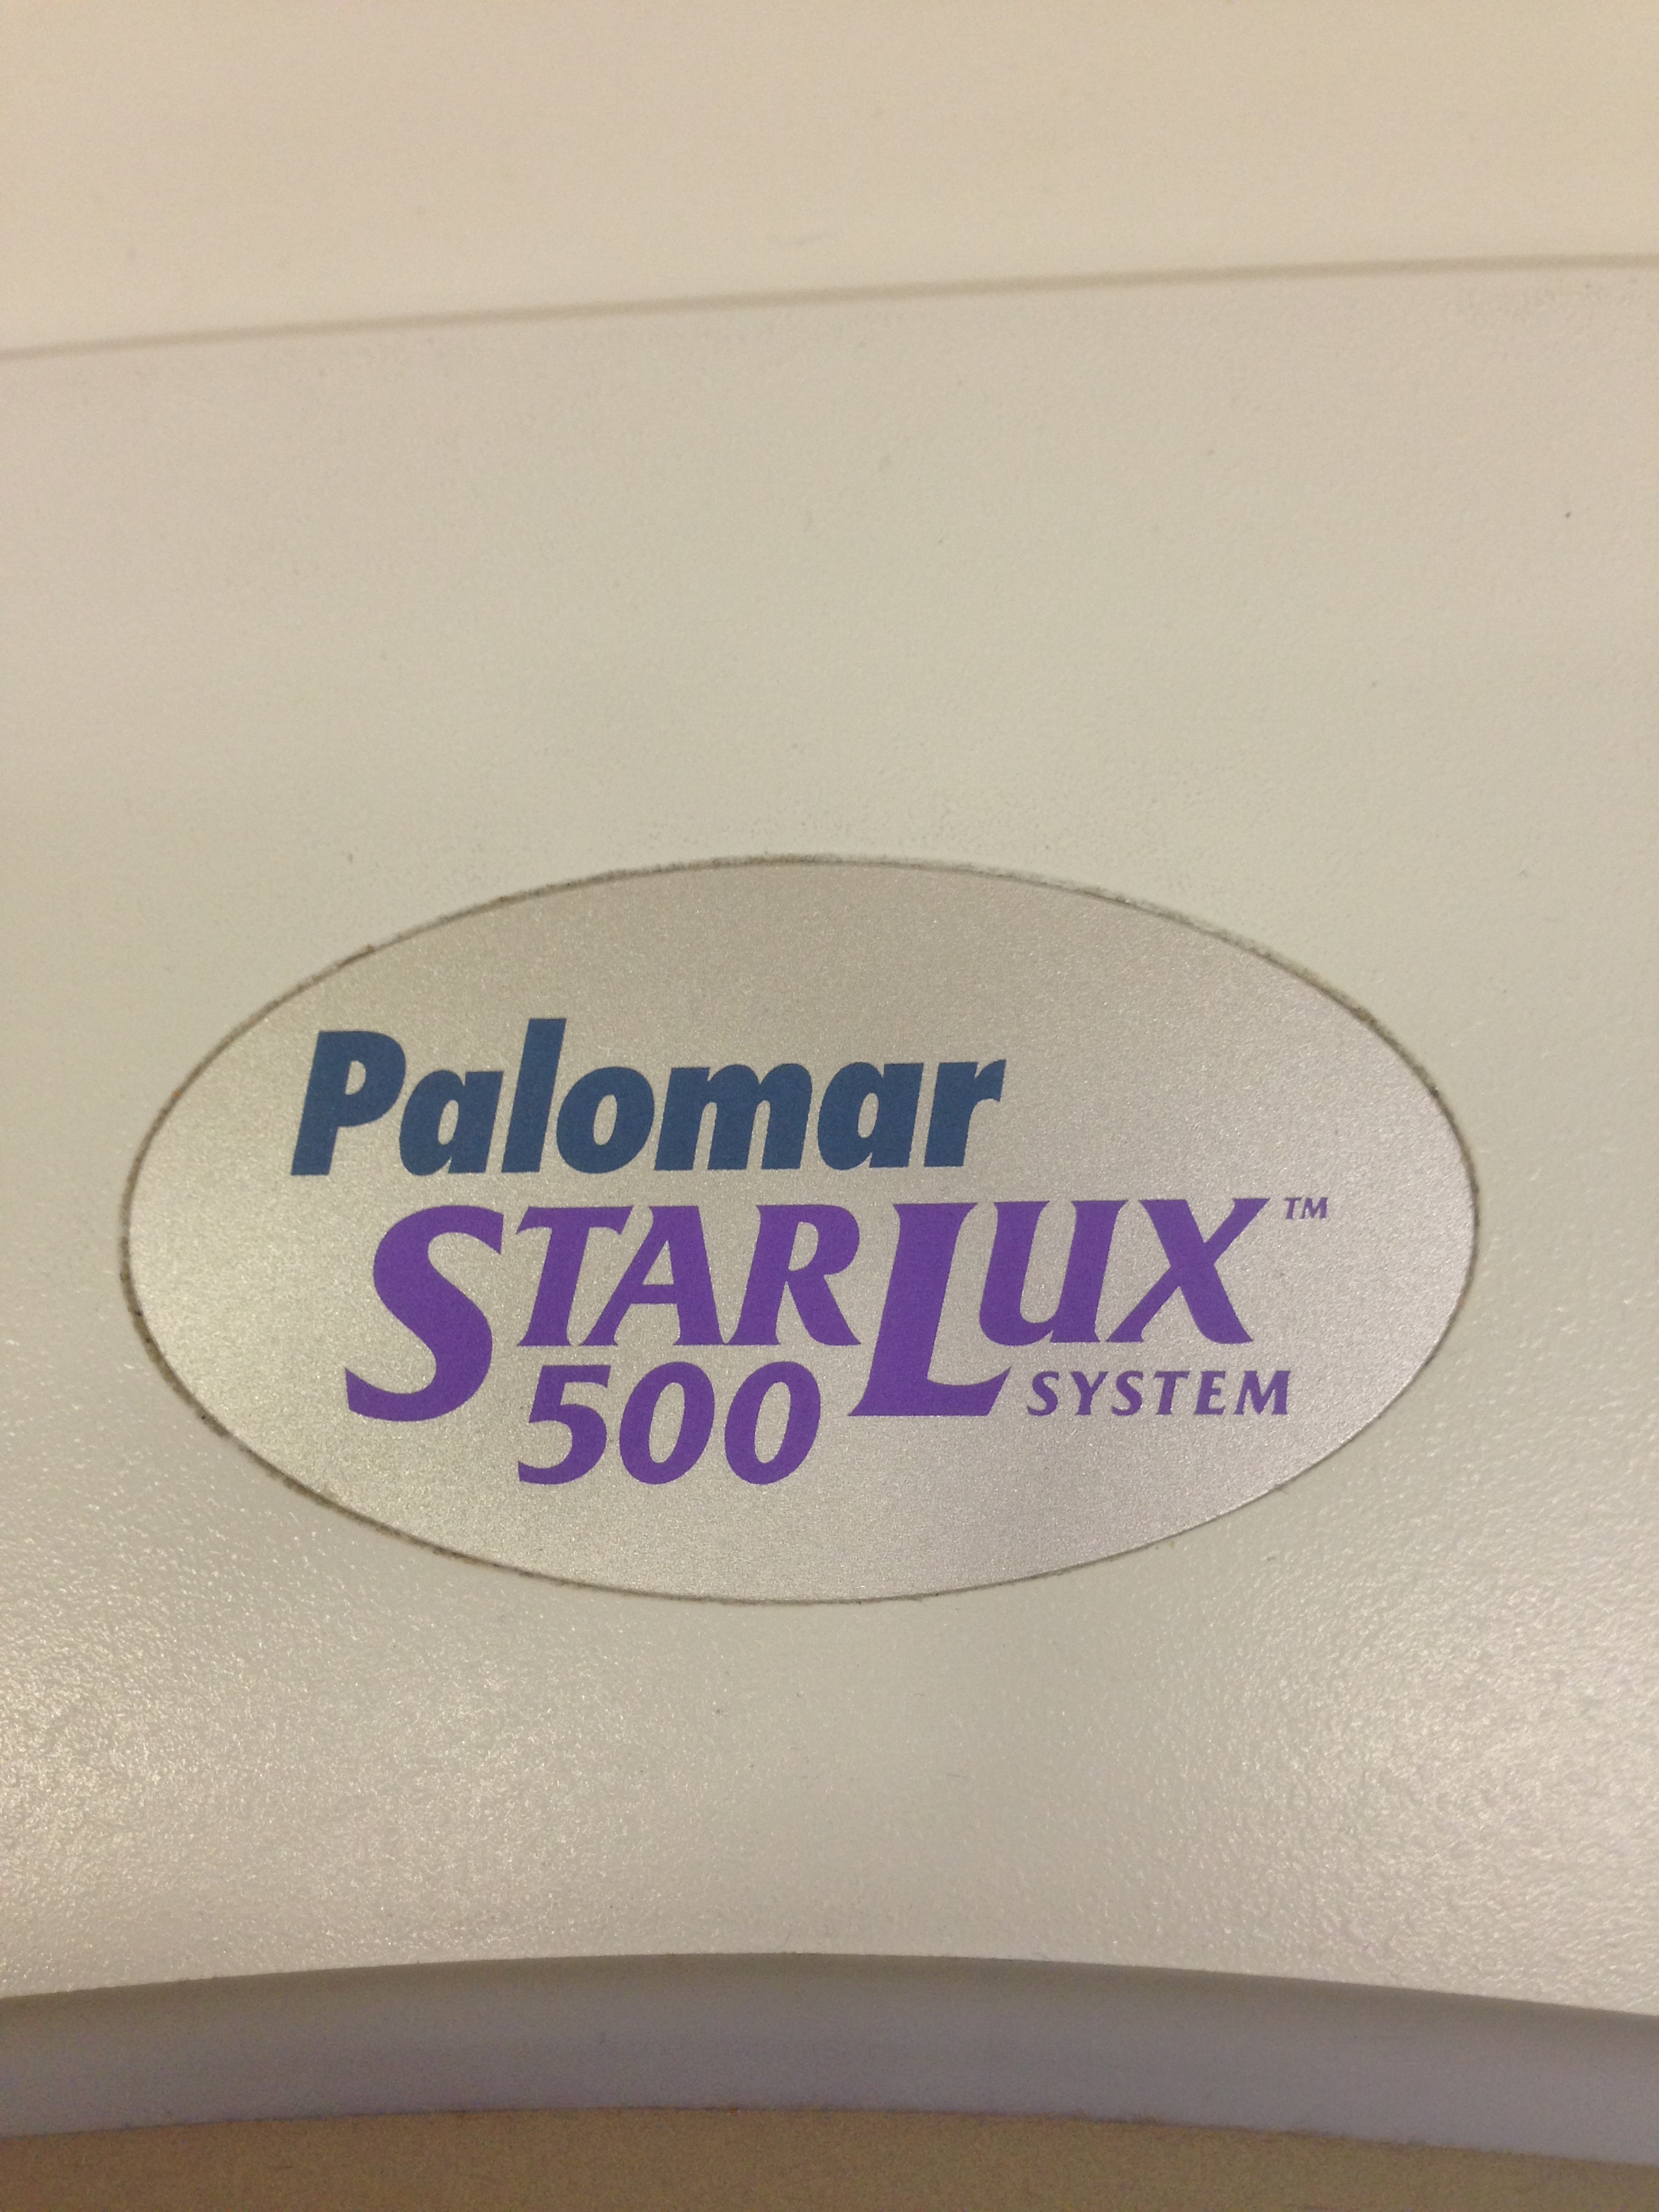 2008 Palomar Starlux 500 with 4 Handpieces: LuxRs, LuxY, MaxG, Lux1540